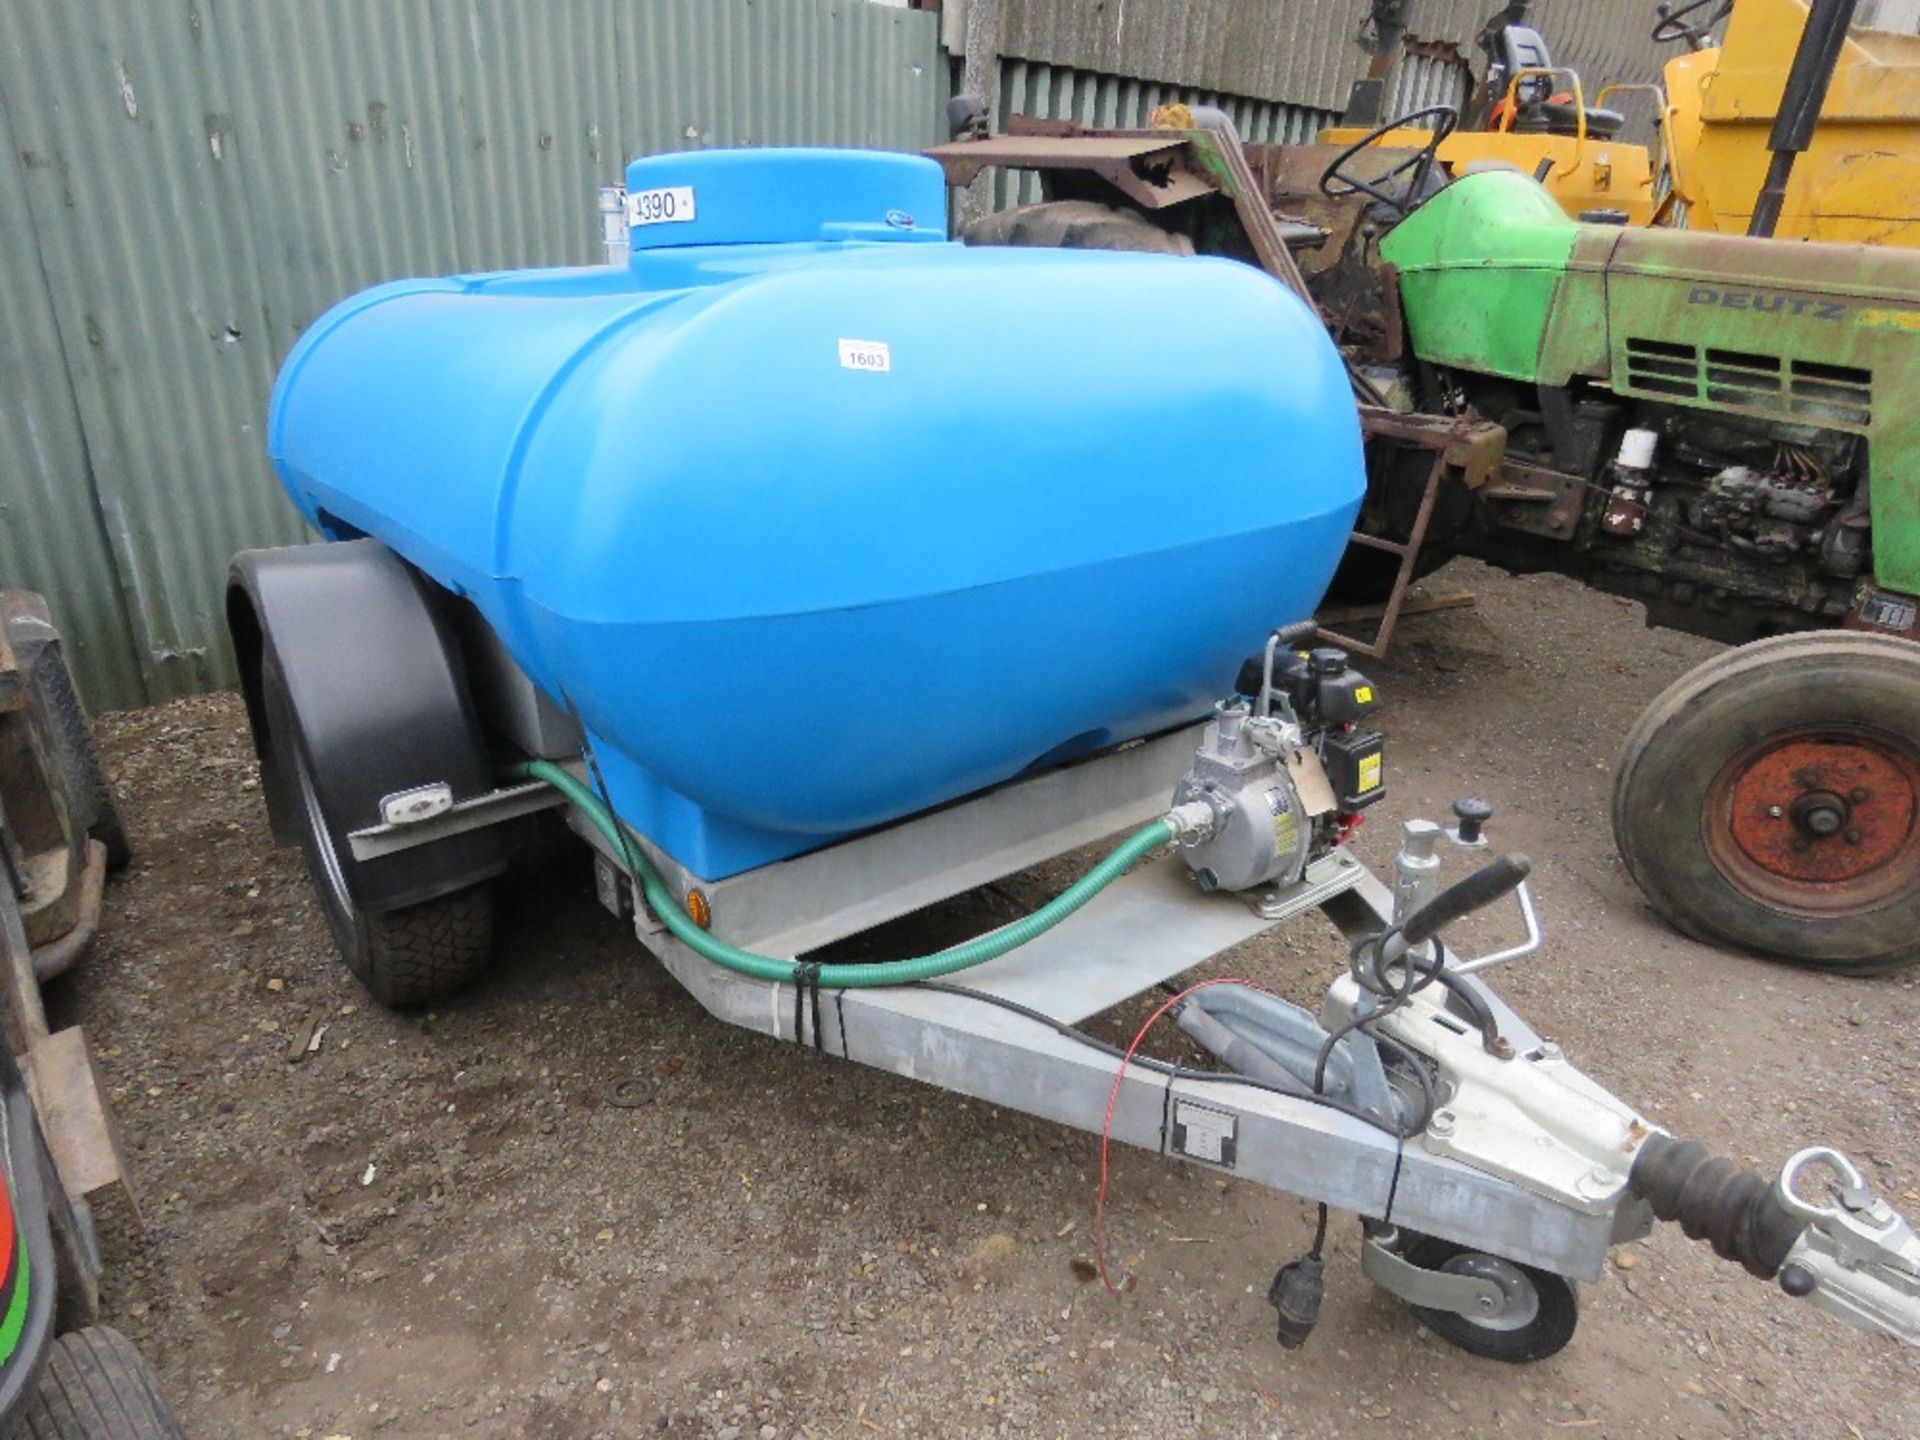 TRAILER ENGINEERING SINGLE AXLED WATER BOWSER WITH HONDA WATER PUMP. OWNER DOWNSIZING SO SURPLUS TO